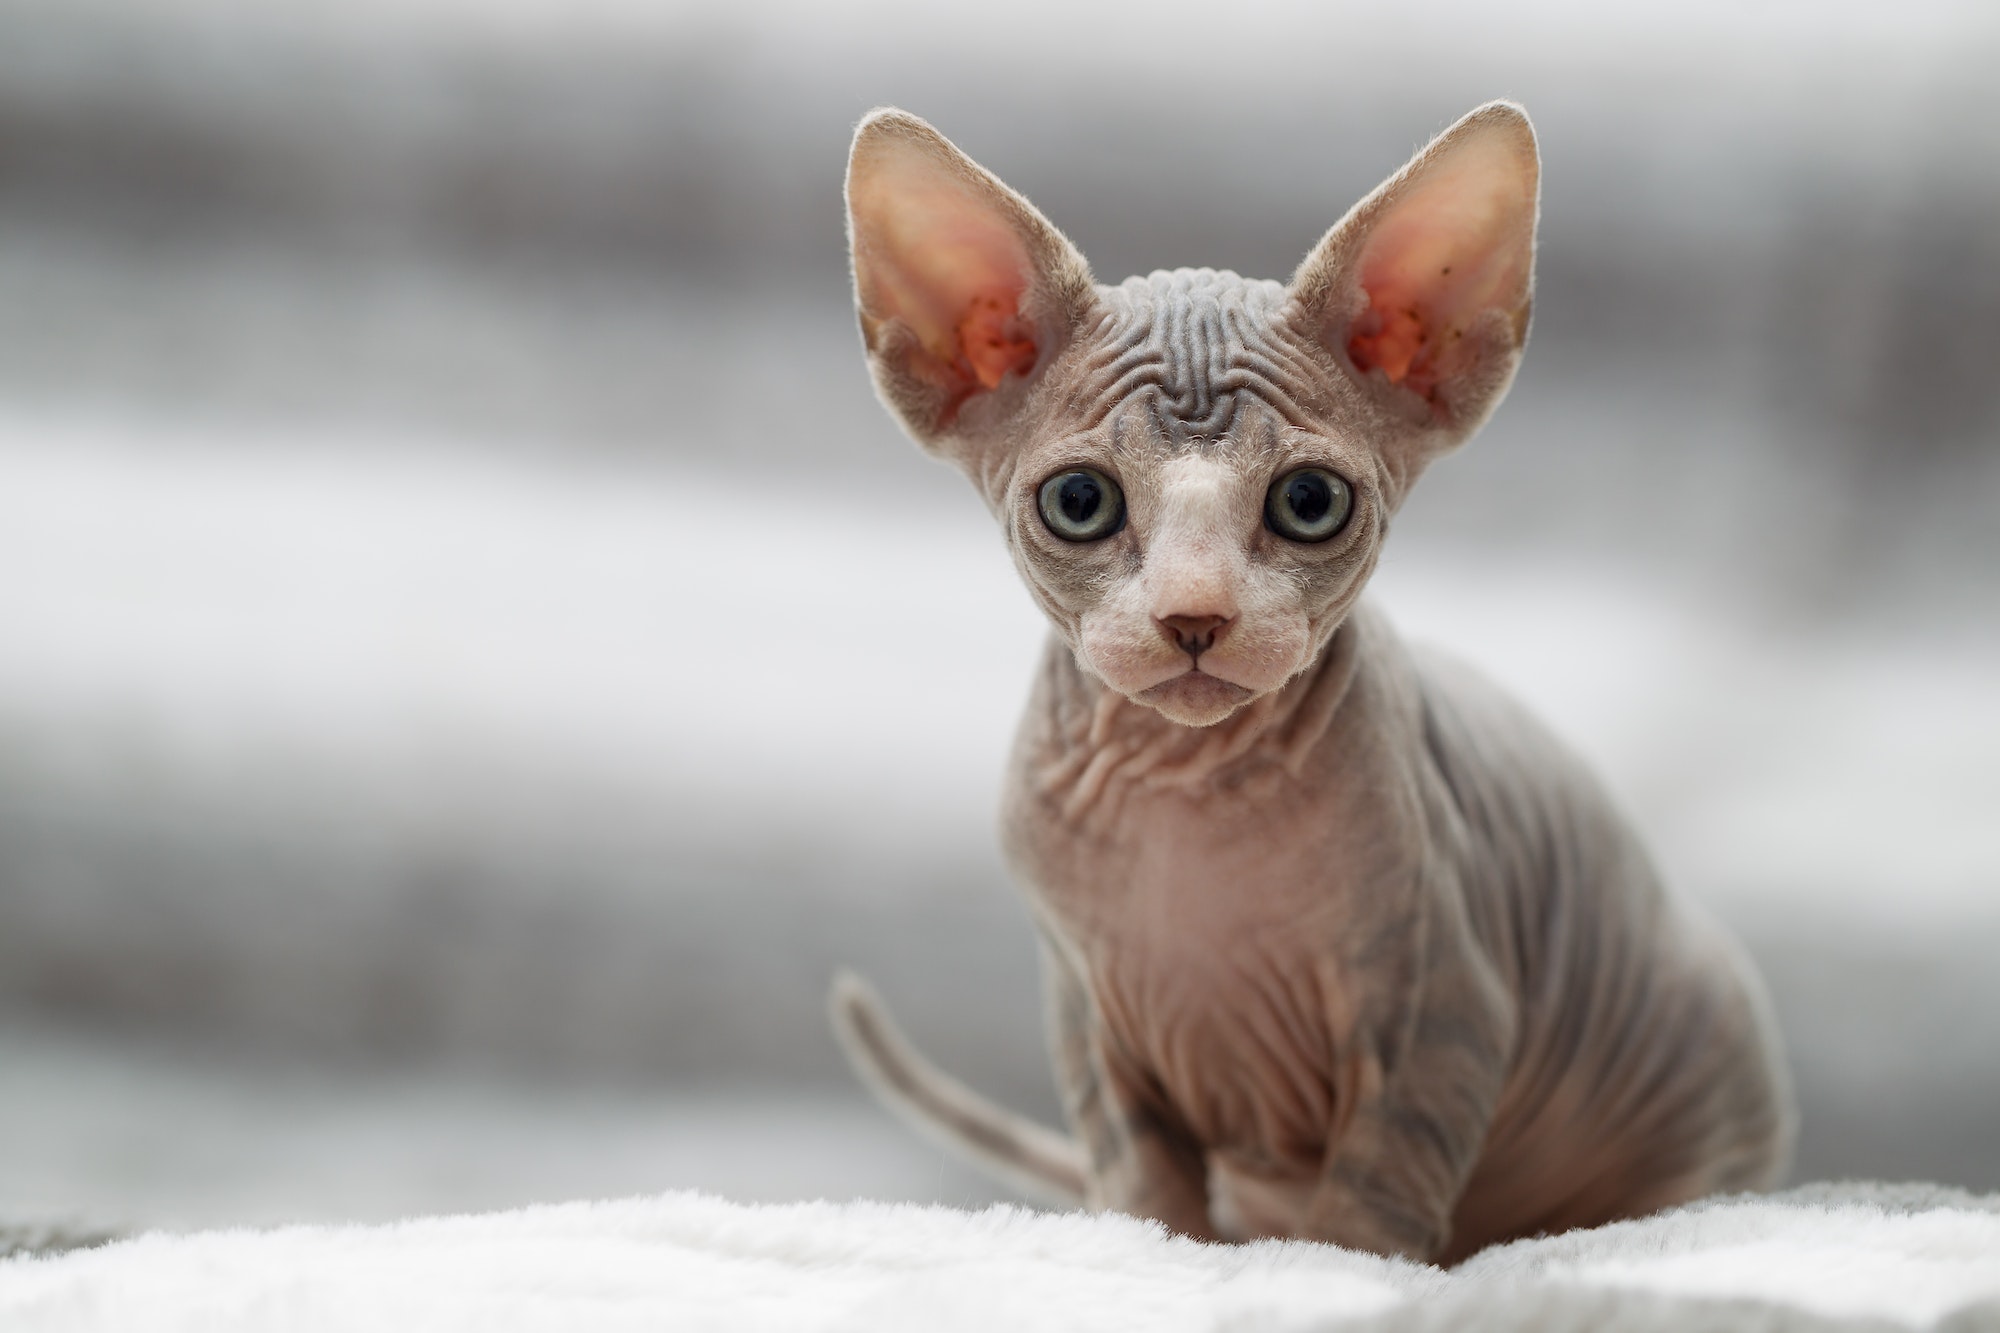 Animal portrait of sphynx cat looking at camera